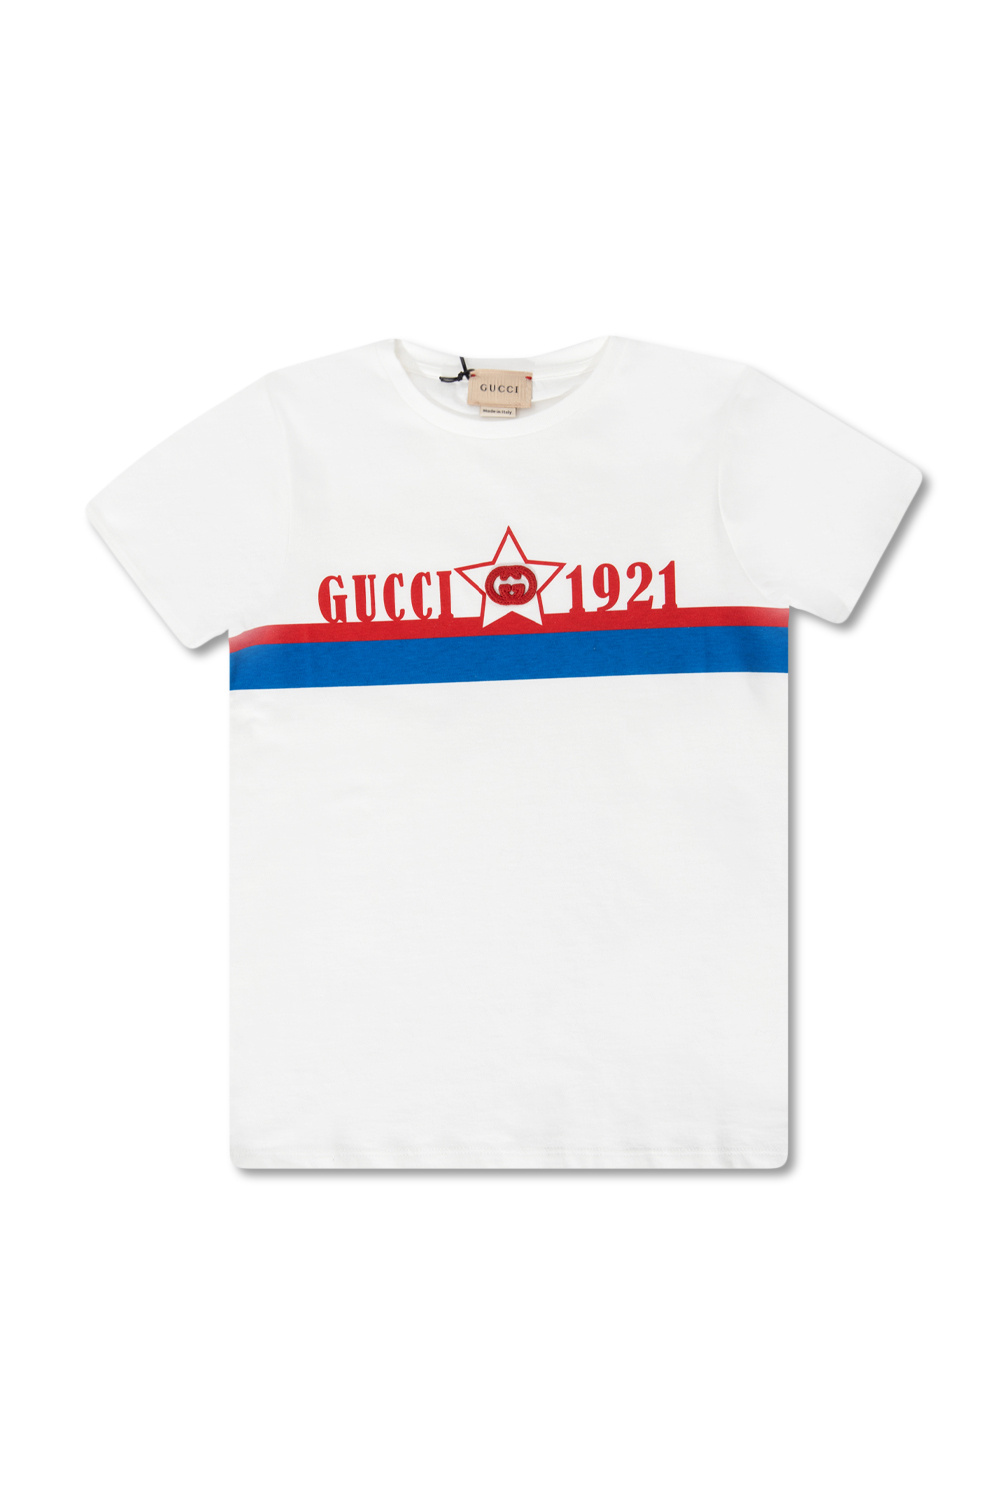 Gucci Kids Gucci And adidas Announce Collaboration